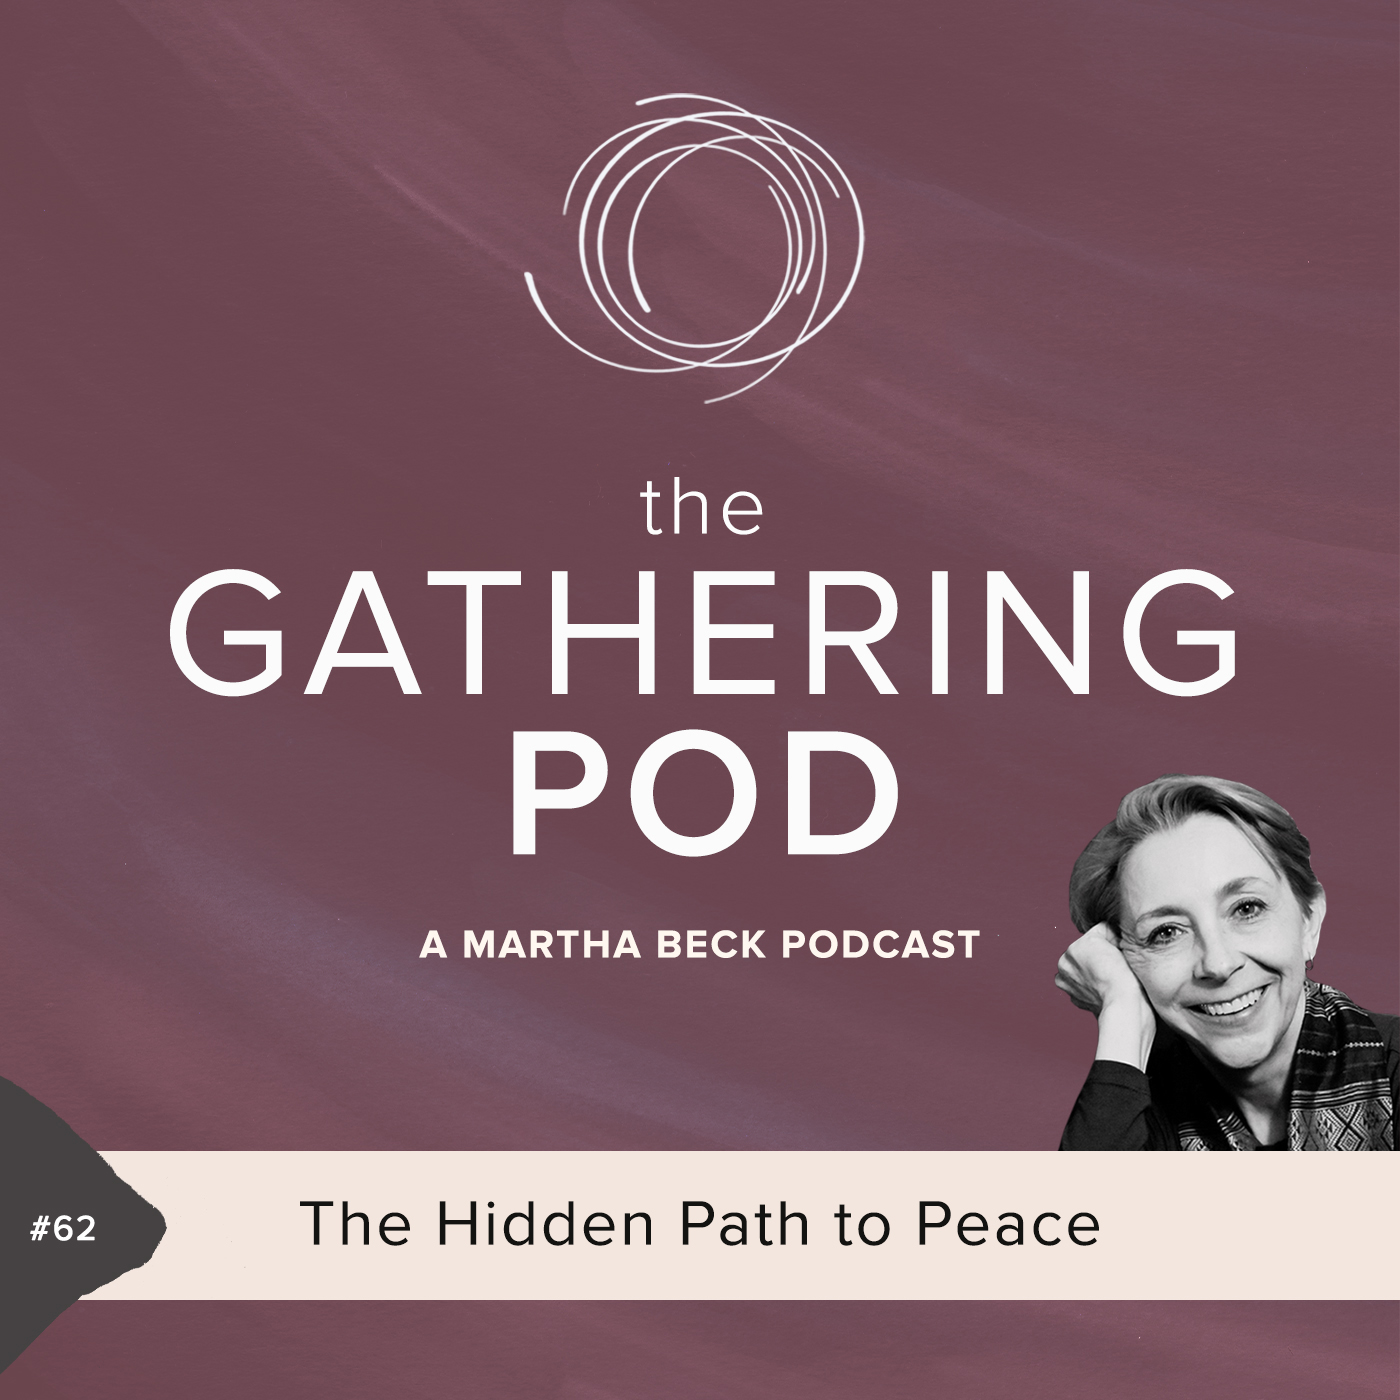 Image for The Gathering Pod A Martha Beck Podcast Episode #62 The Hidden Path to Peace